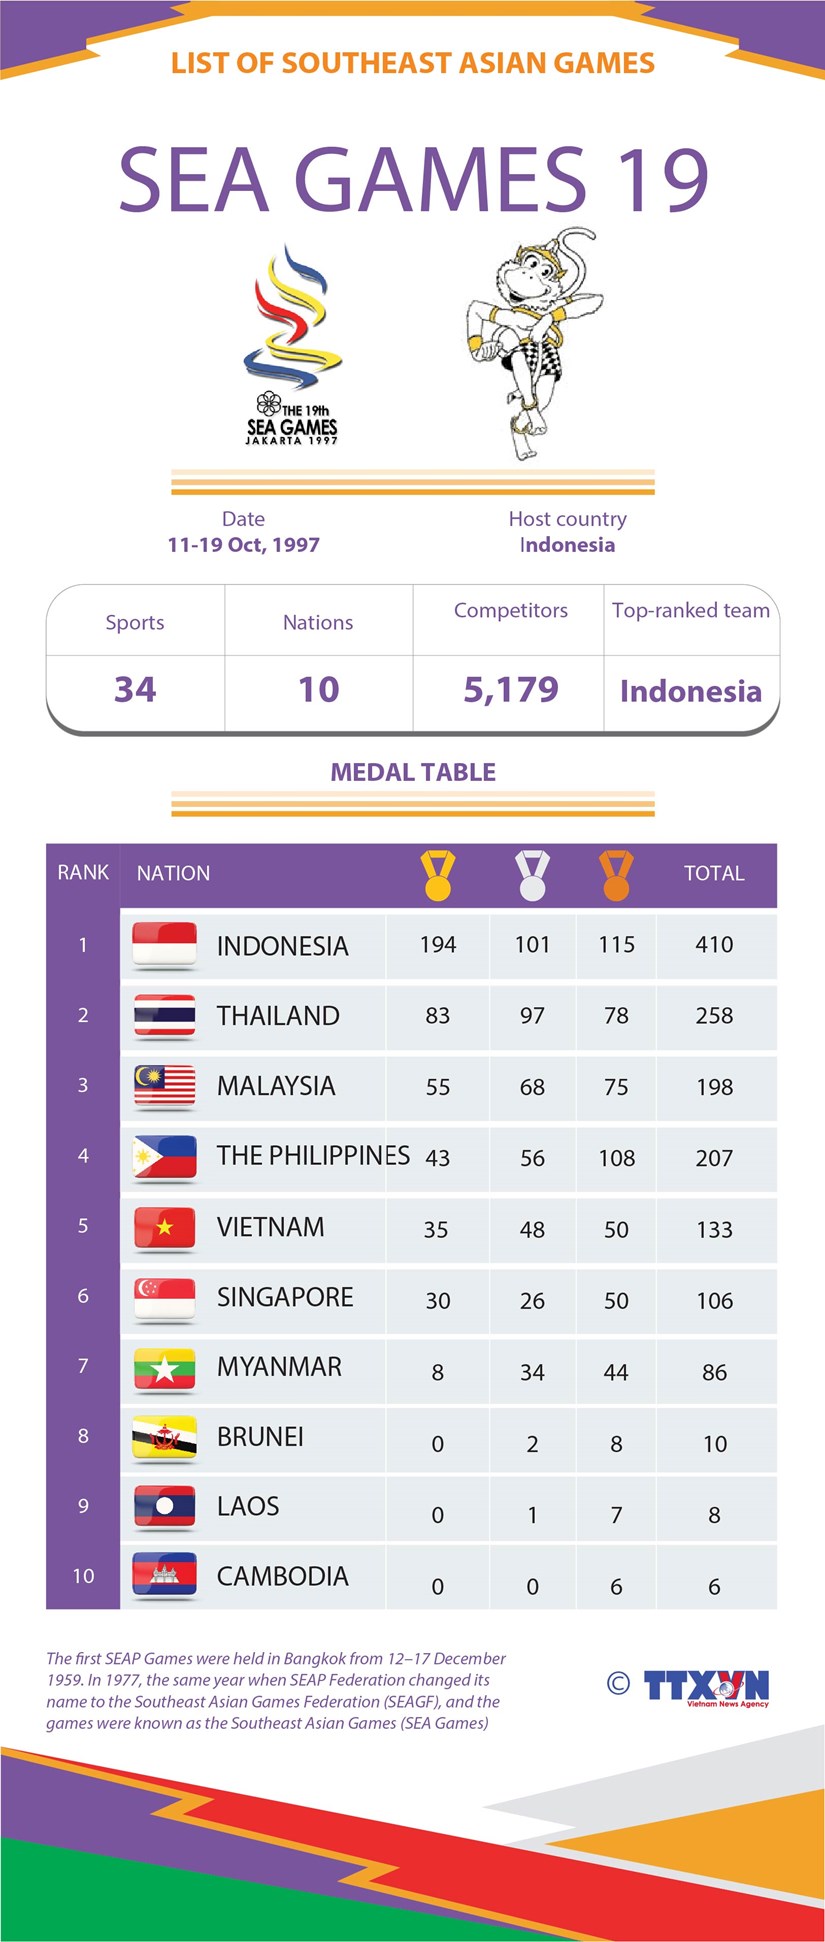 List of Southeast Asian Games: SEA Games 19 hinh anh 1